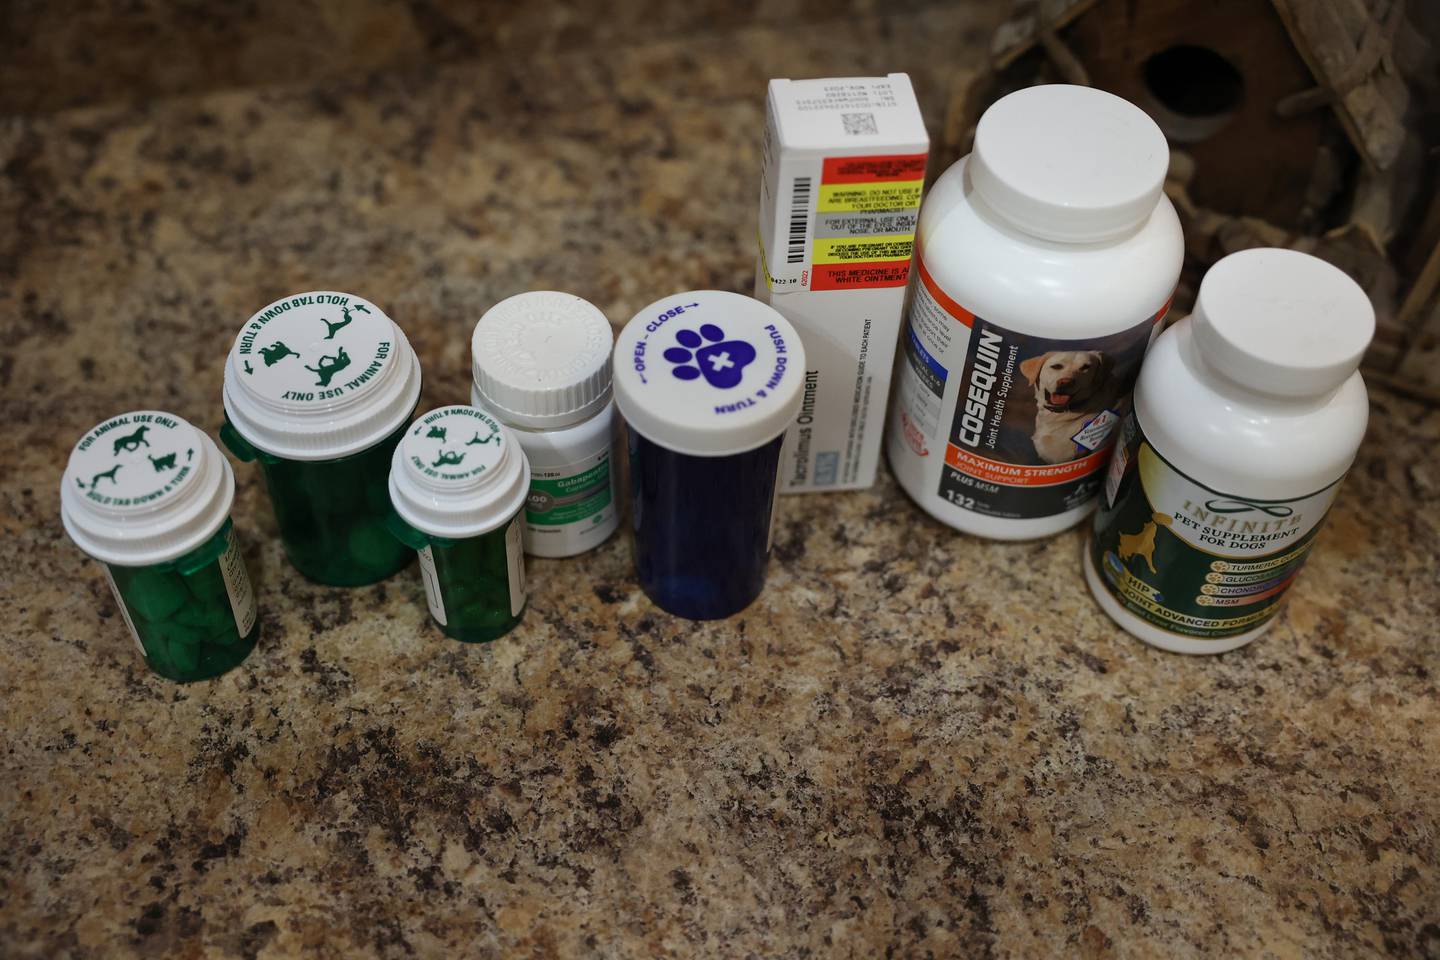 Kathy Vanoskey of Minooka has the medicine and supplements for her three dogs sitting on the counter. Vanoskey is raising money to pay for Teddy's surgery, a repair of the canine version of a torn ACL.